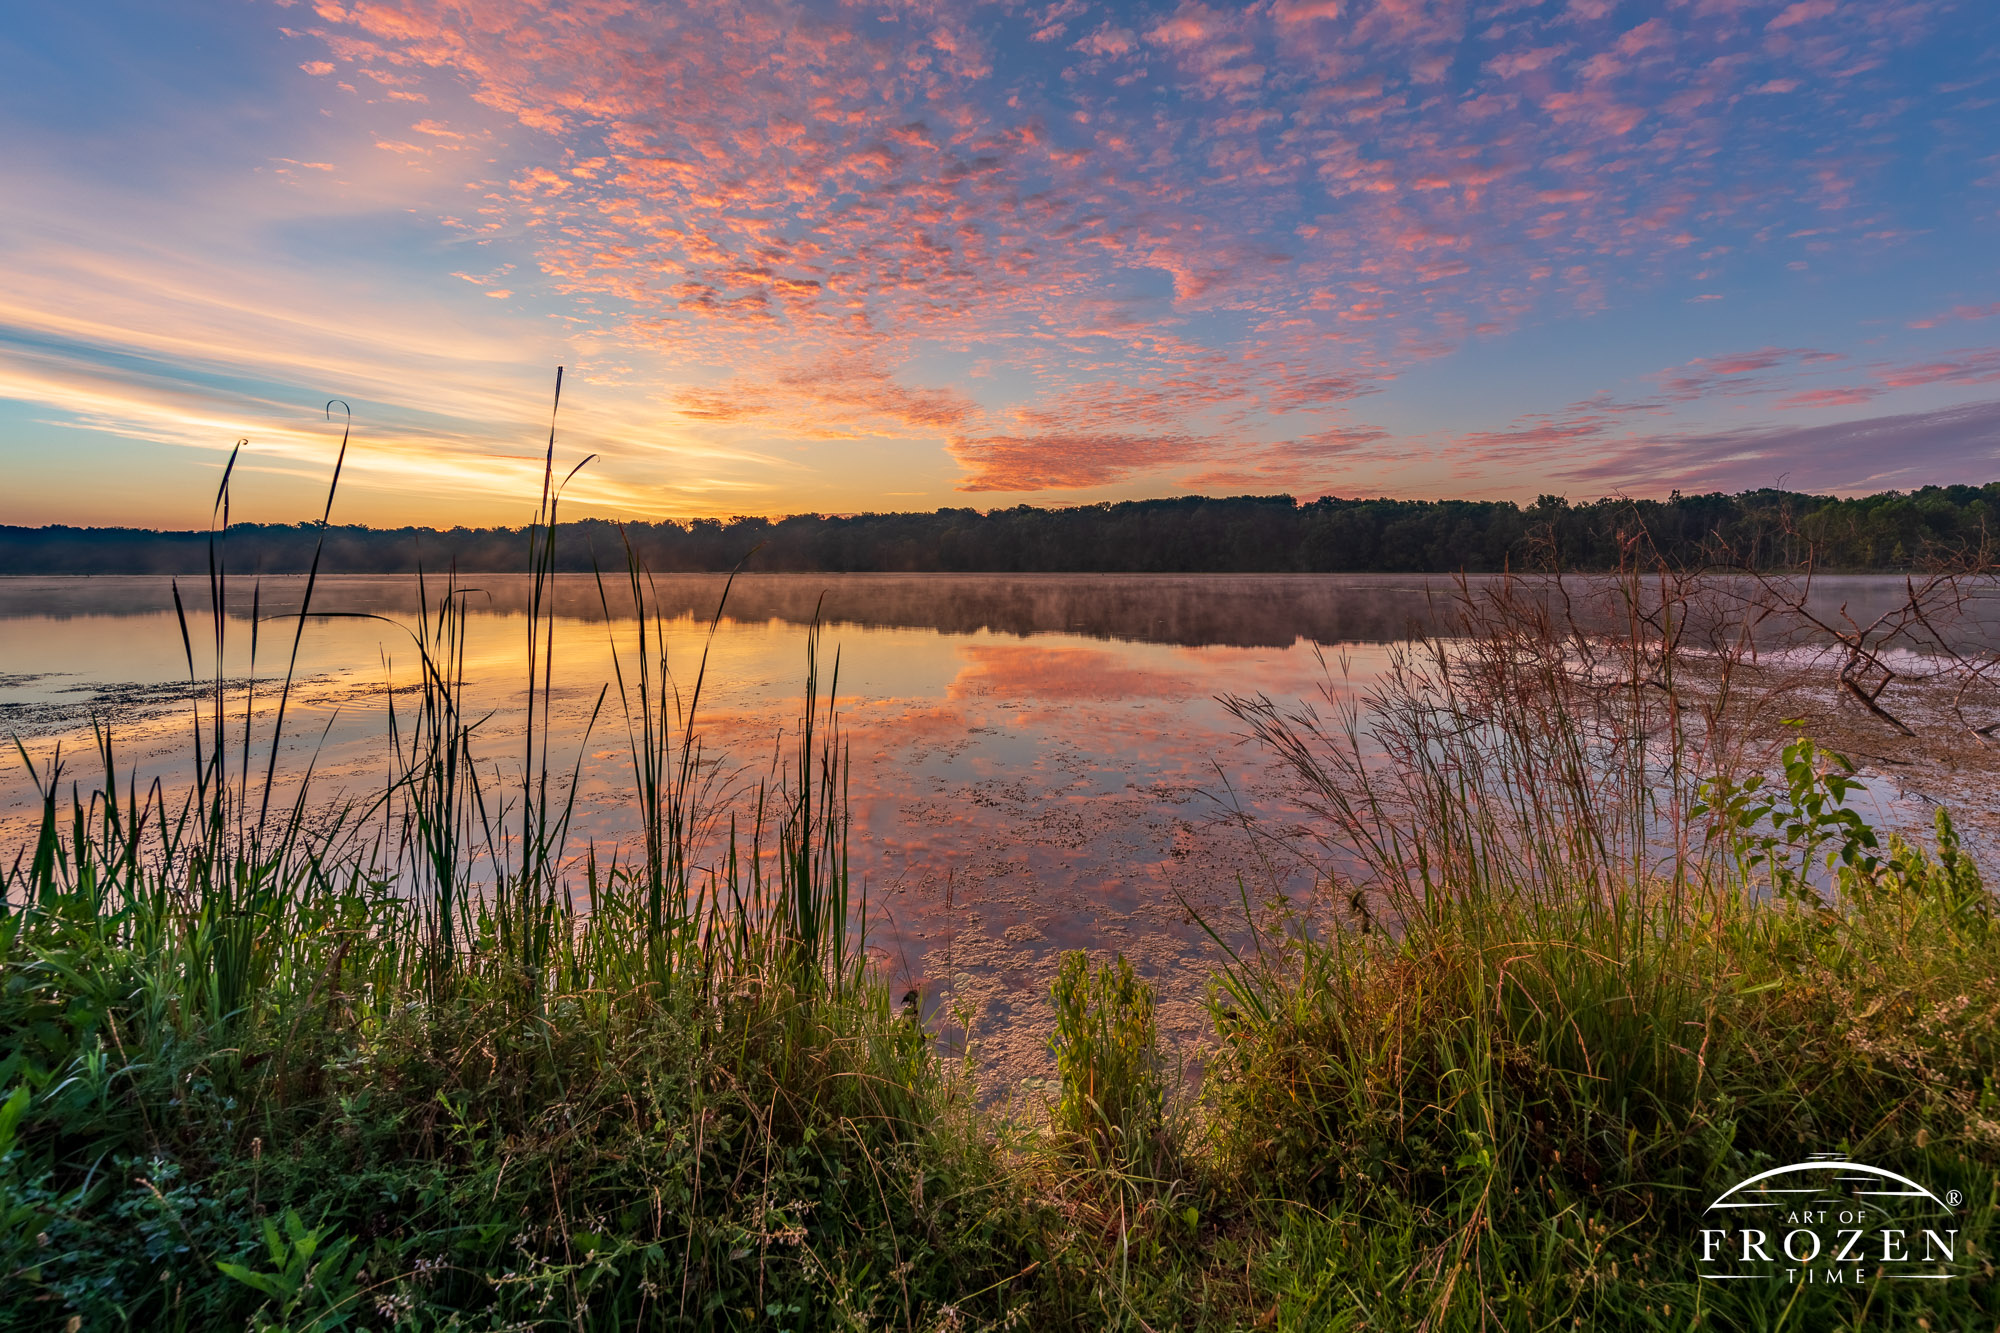 A colorful sunrise over Spring Valley Wildlife Area where various cloud layers color the scene in their own way and the still lake waters form a mirror reflection